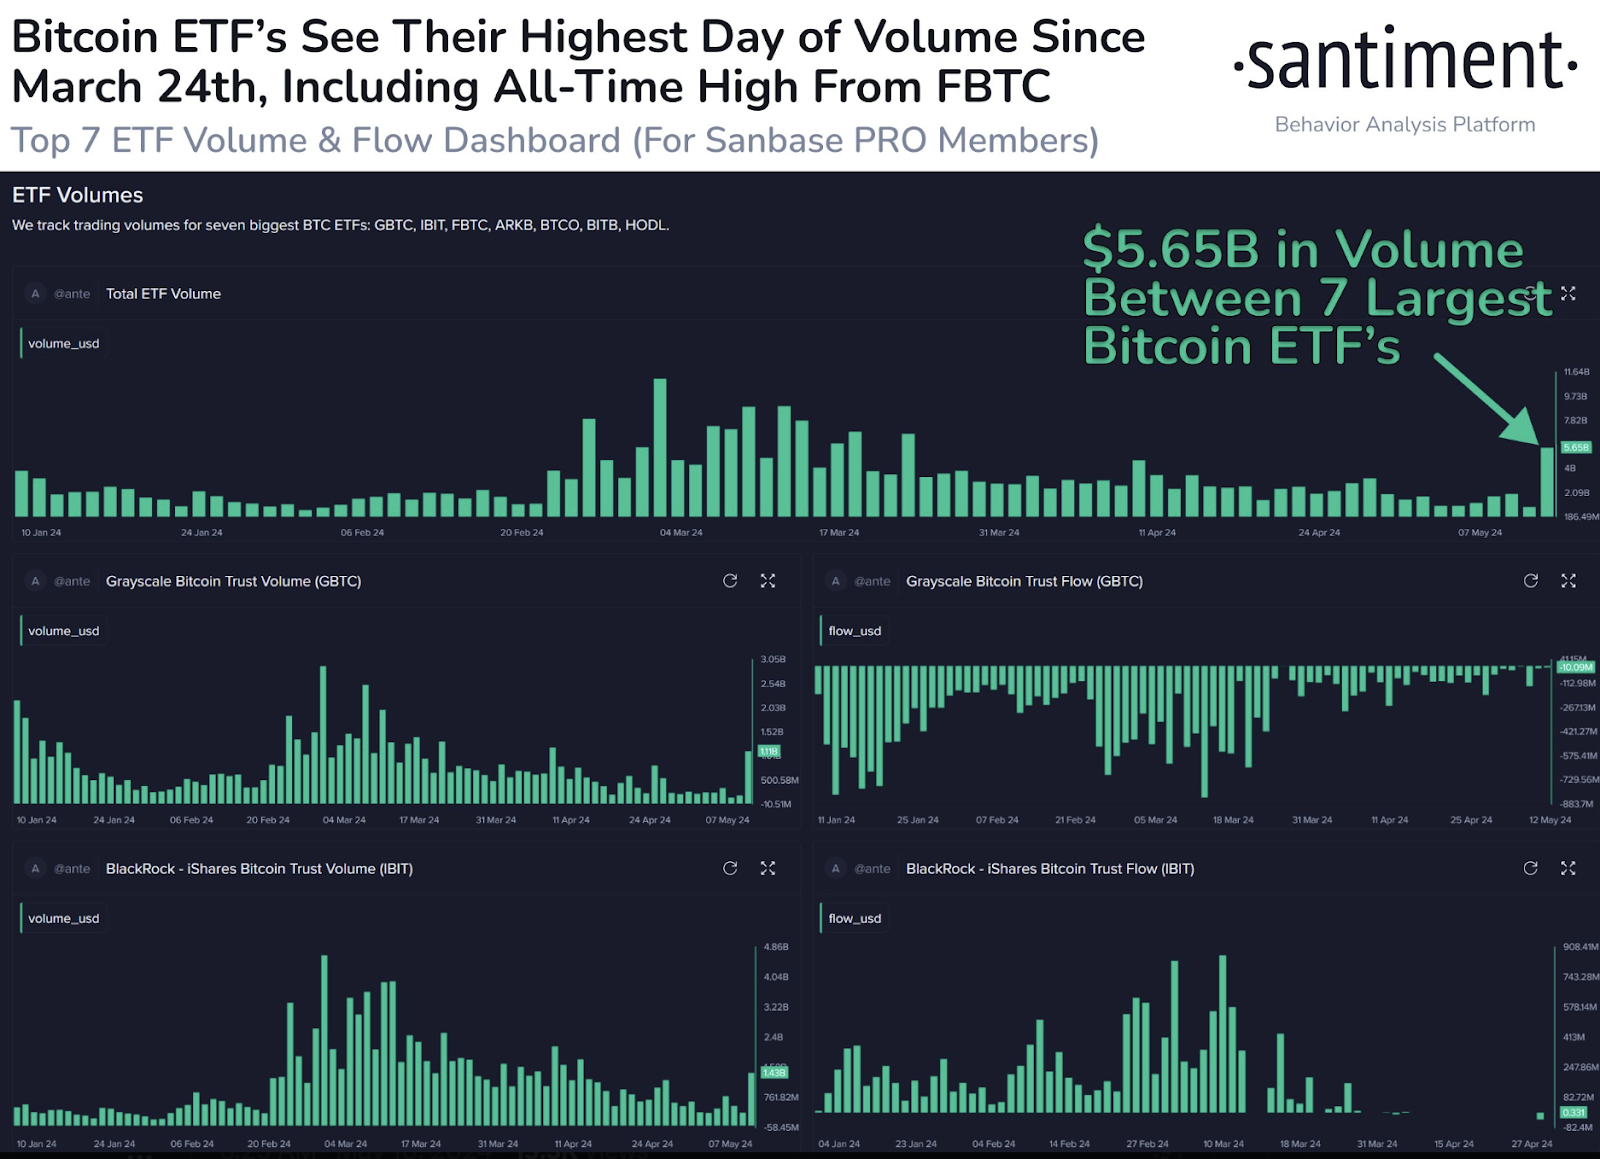 Bitcoin Spot ETF Volume Spikes Up: Will Grayscale & BlackRock Lift the BTC Price Rally?